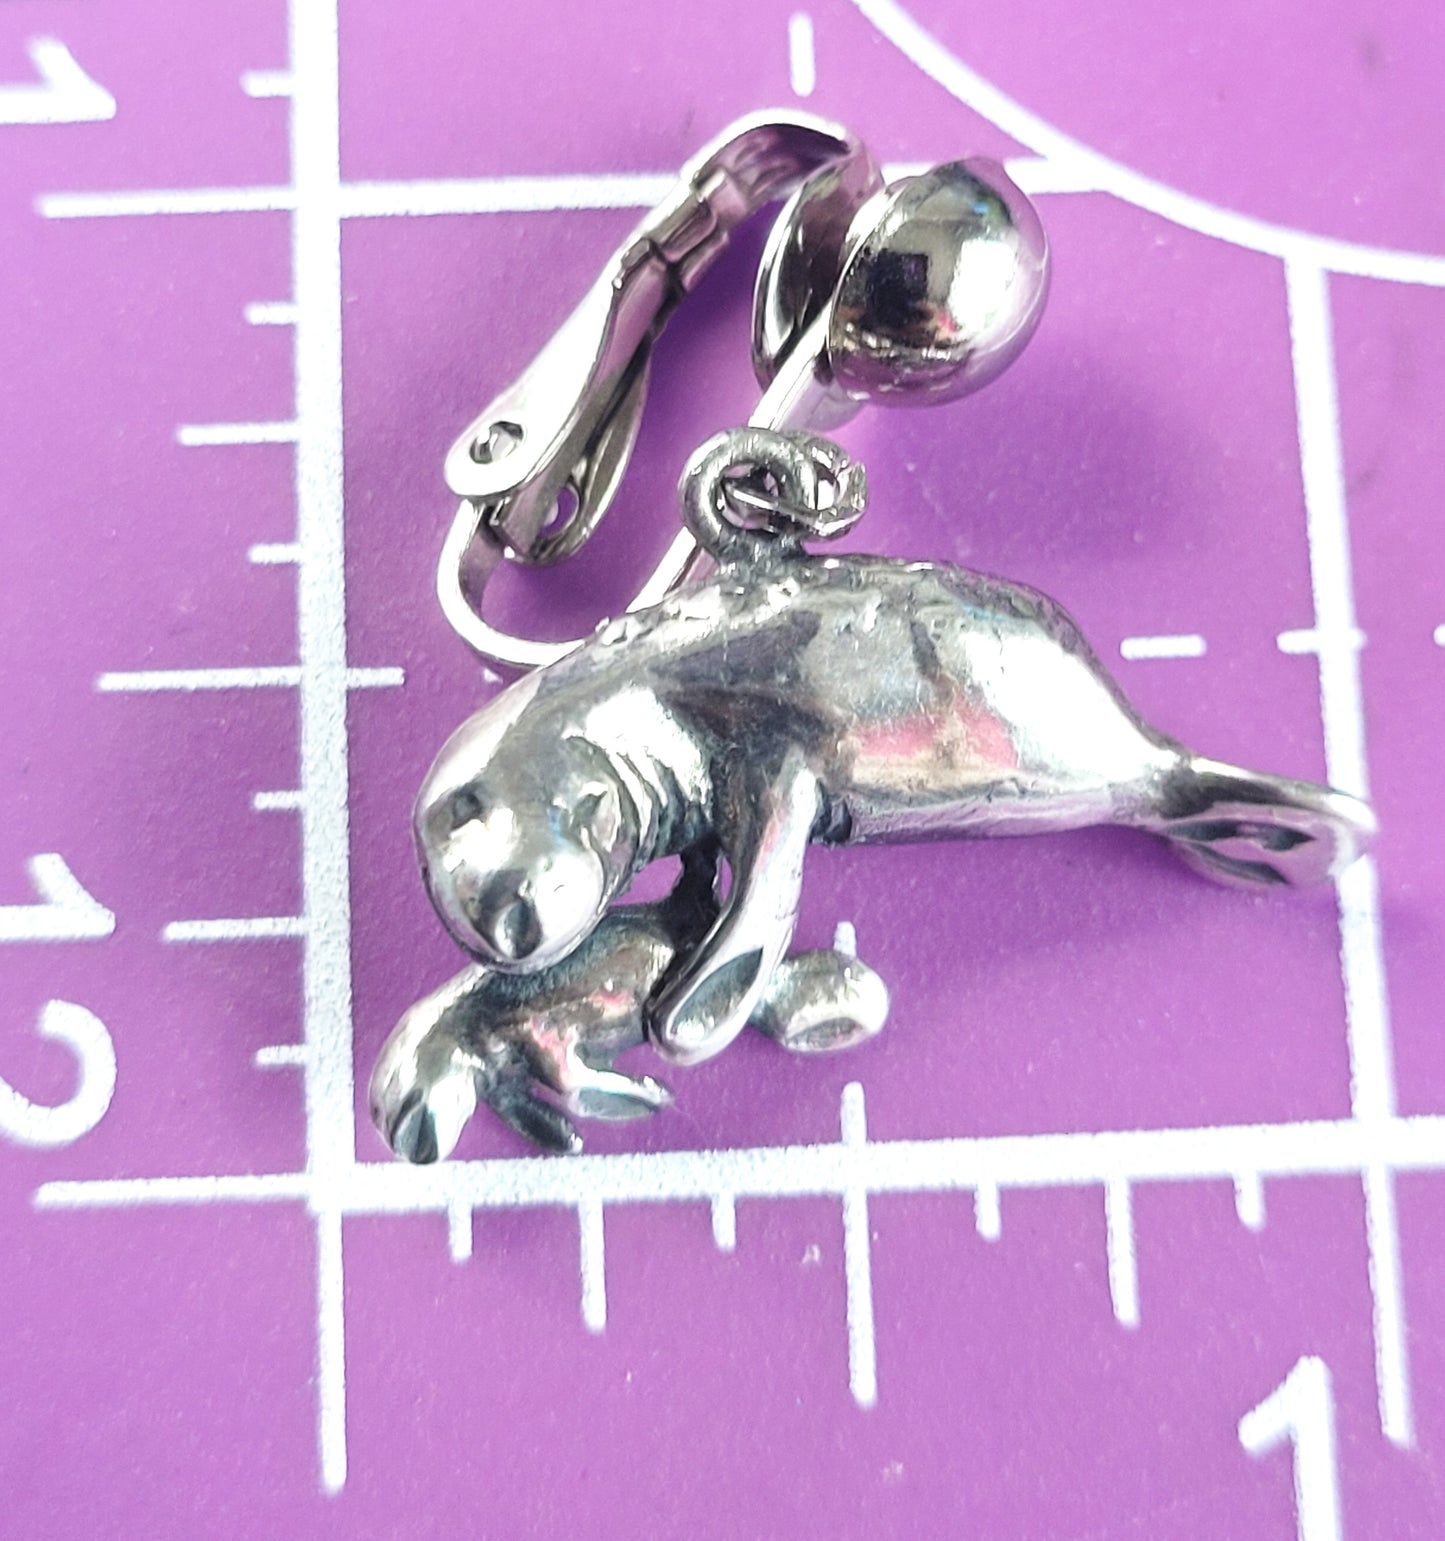 Mom and baby sterling silver vintage sea life clip on earrings